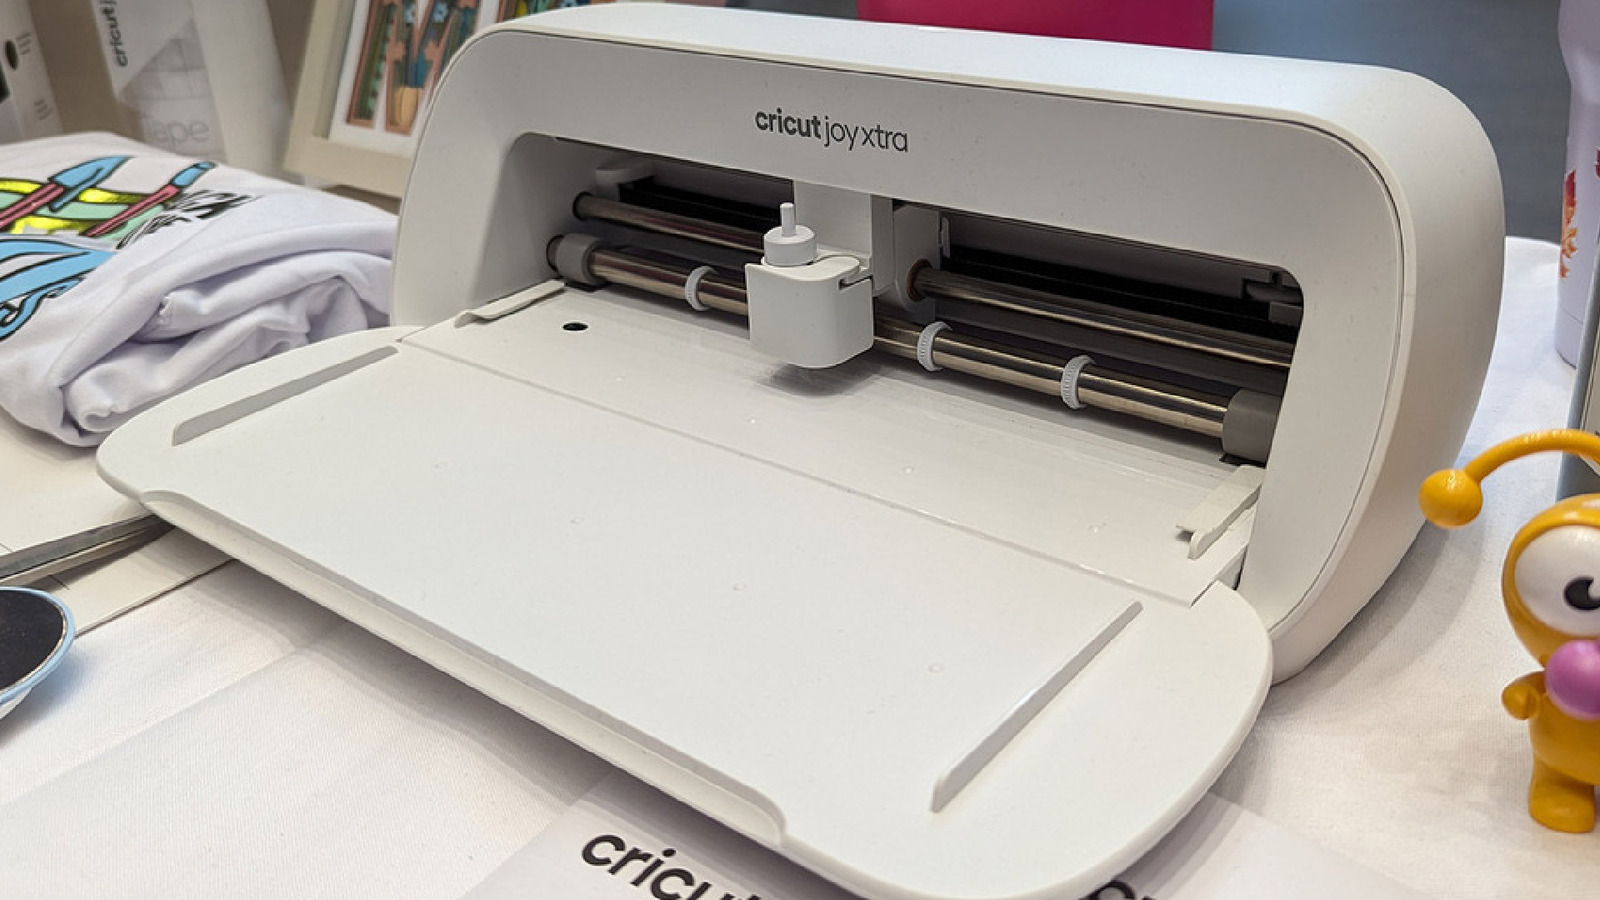 Cricut Joy Xtra: Everything you need to know about the new Cricut machine